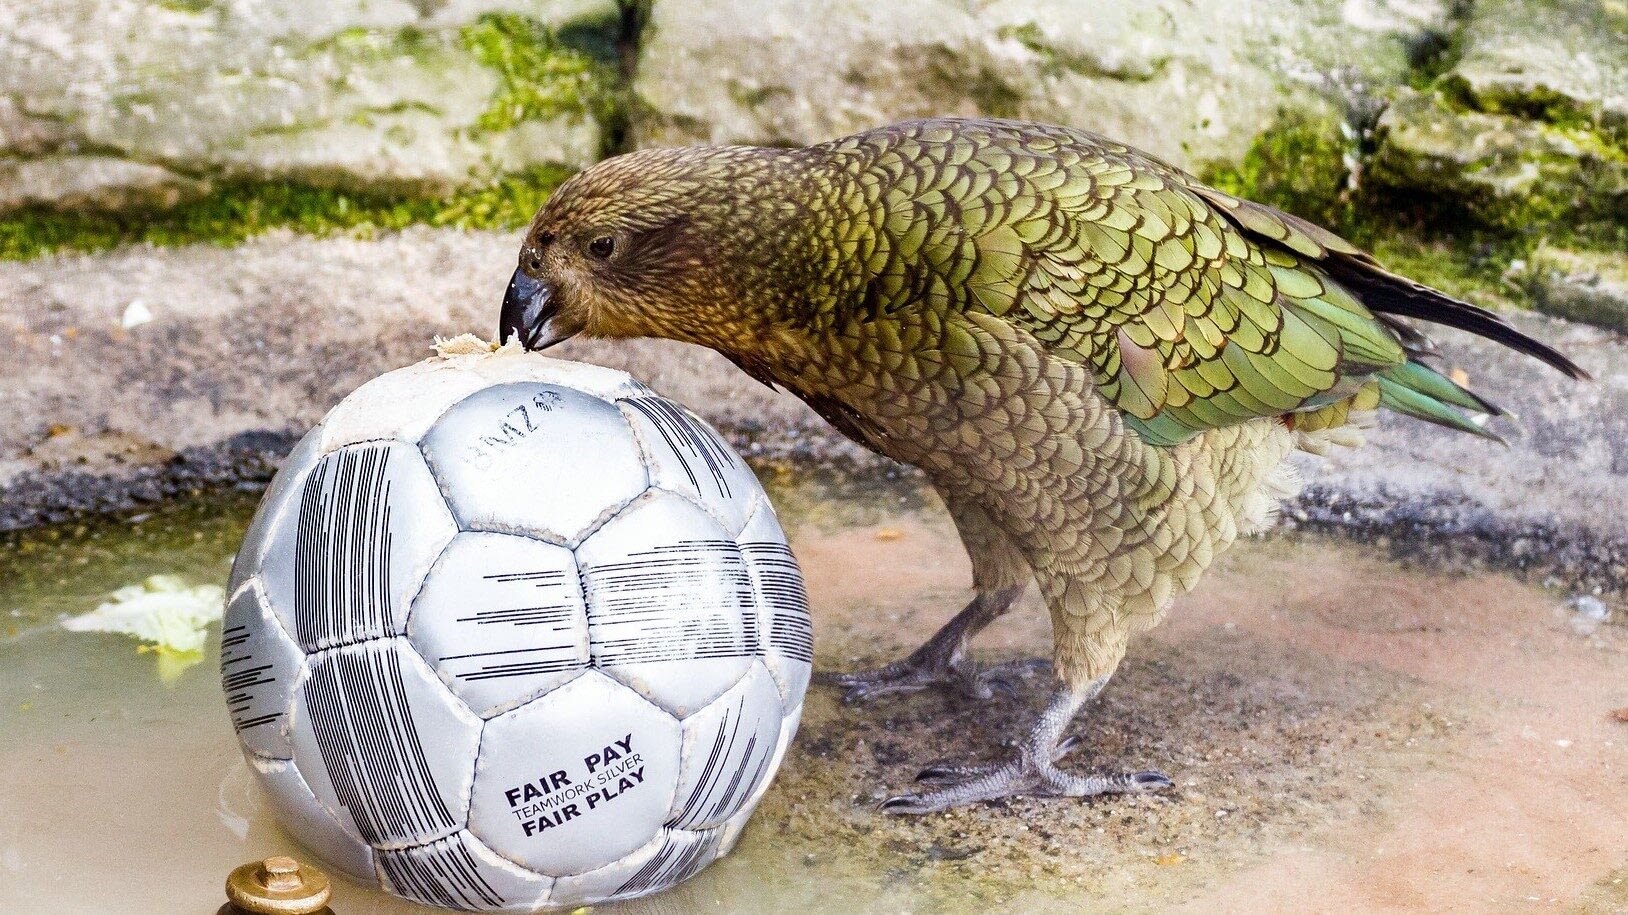 Image: a very curious kea checking out a soccer ball